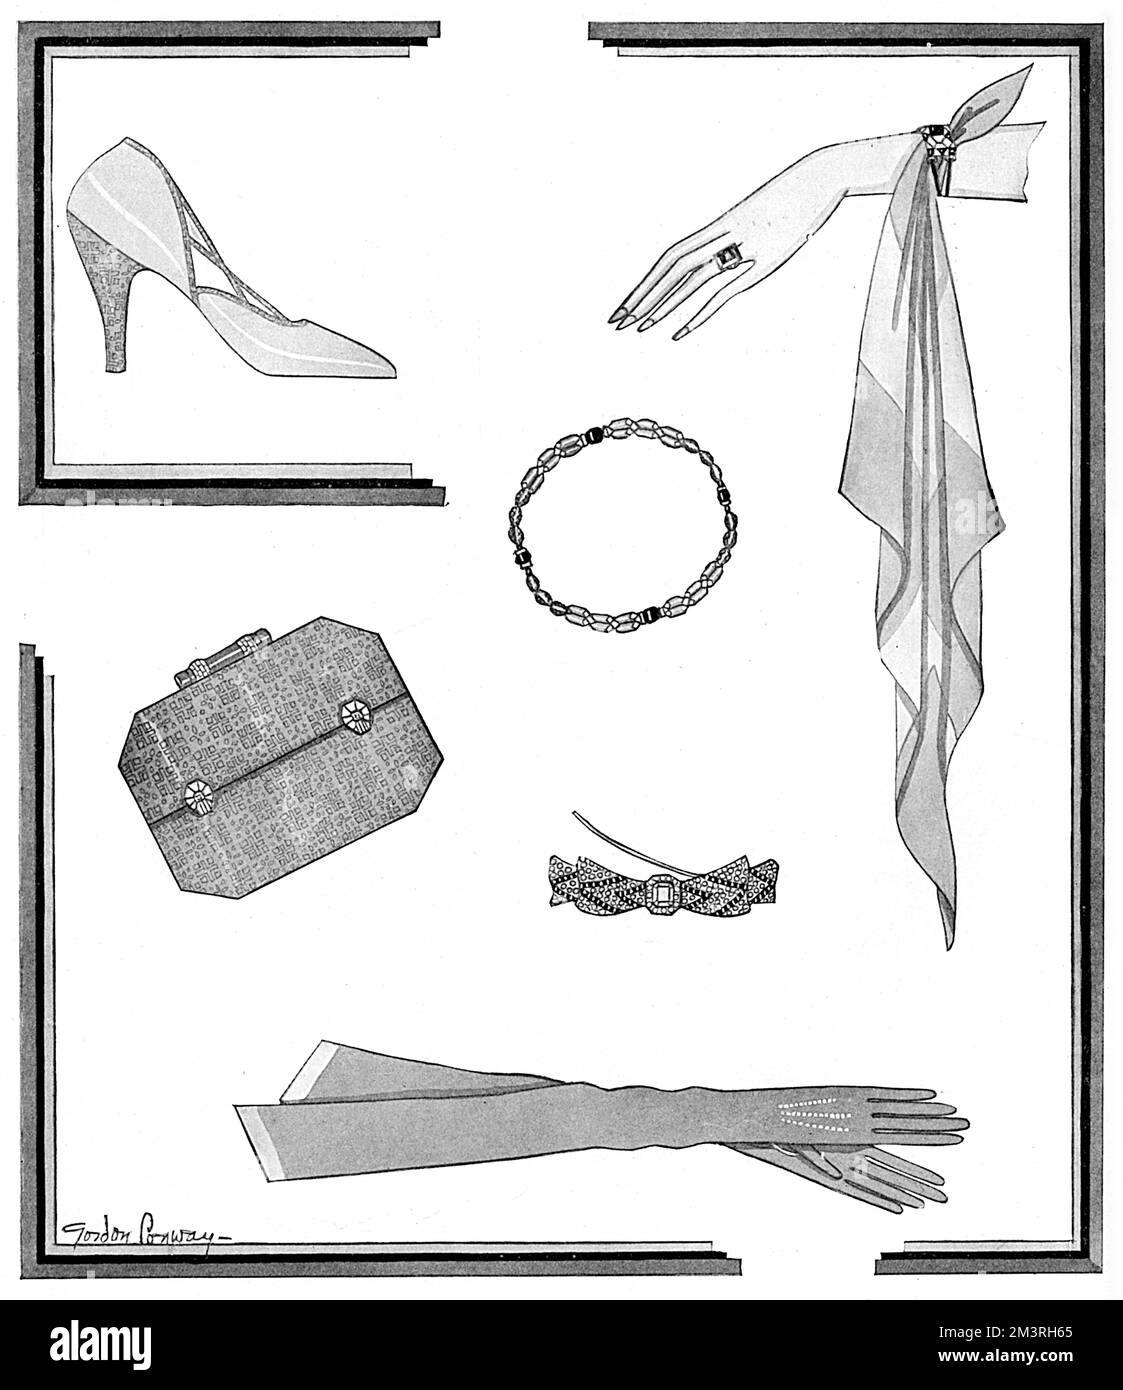 Original accessories designed by the American costume designer, Gordon Conway. The shoe is trimmed with satin and has brocade to match the bag; the clasps of the bag are of diamonds and platinum, with a lipstick case at the top. The necklace is of cut crystal and onyx, as is the barette. The gloves are of velvet and soft suede and the wrist handkerchief is of two shades of chiffon.     Date: 1930 Stock Photo